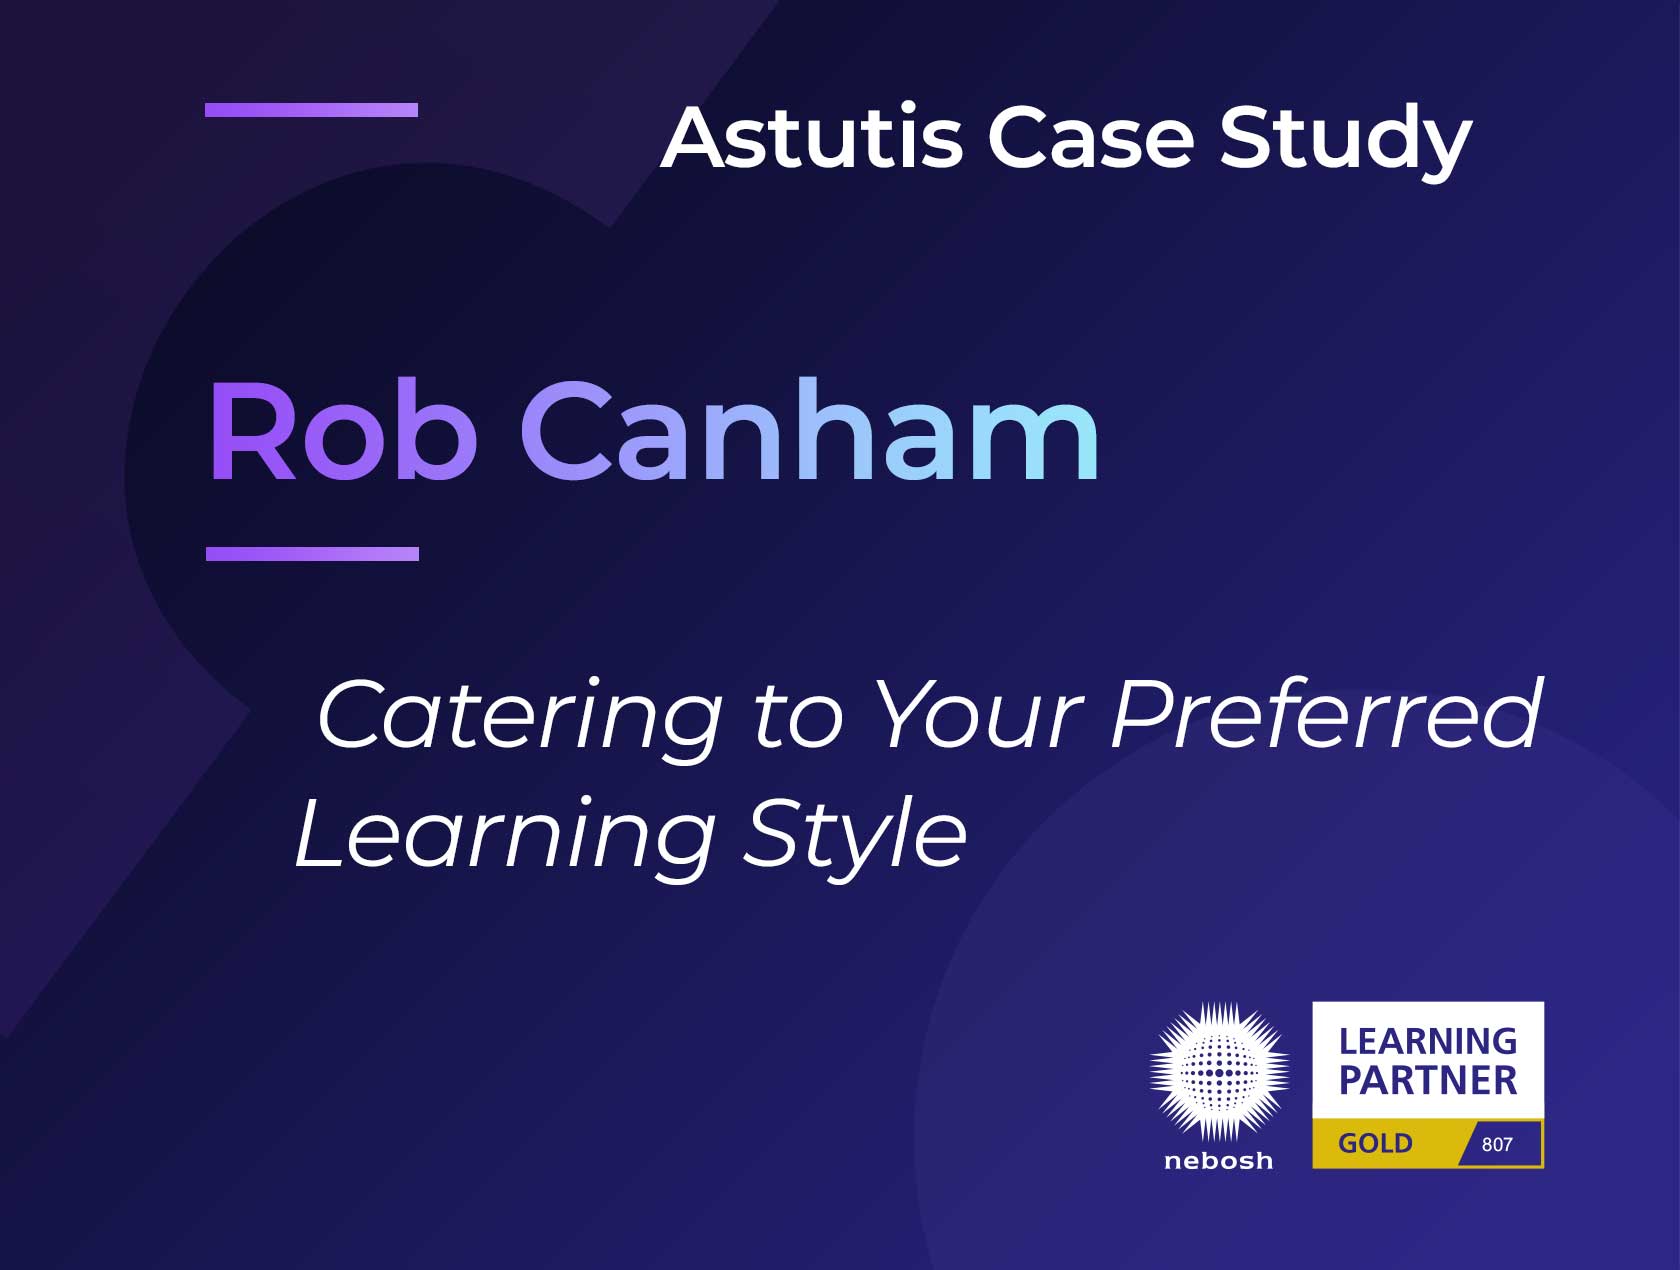 Rob Canham: Catering to Your Preferred Learning Style